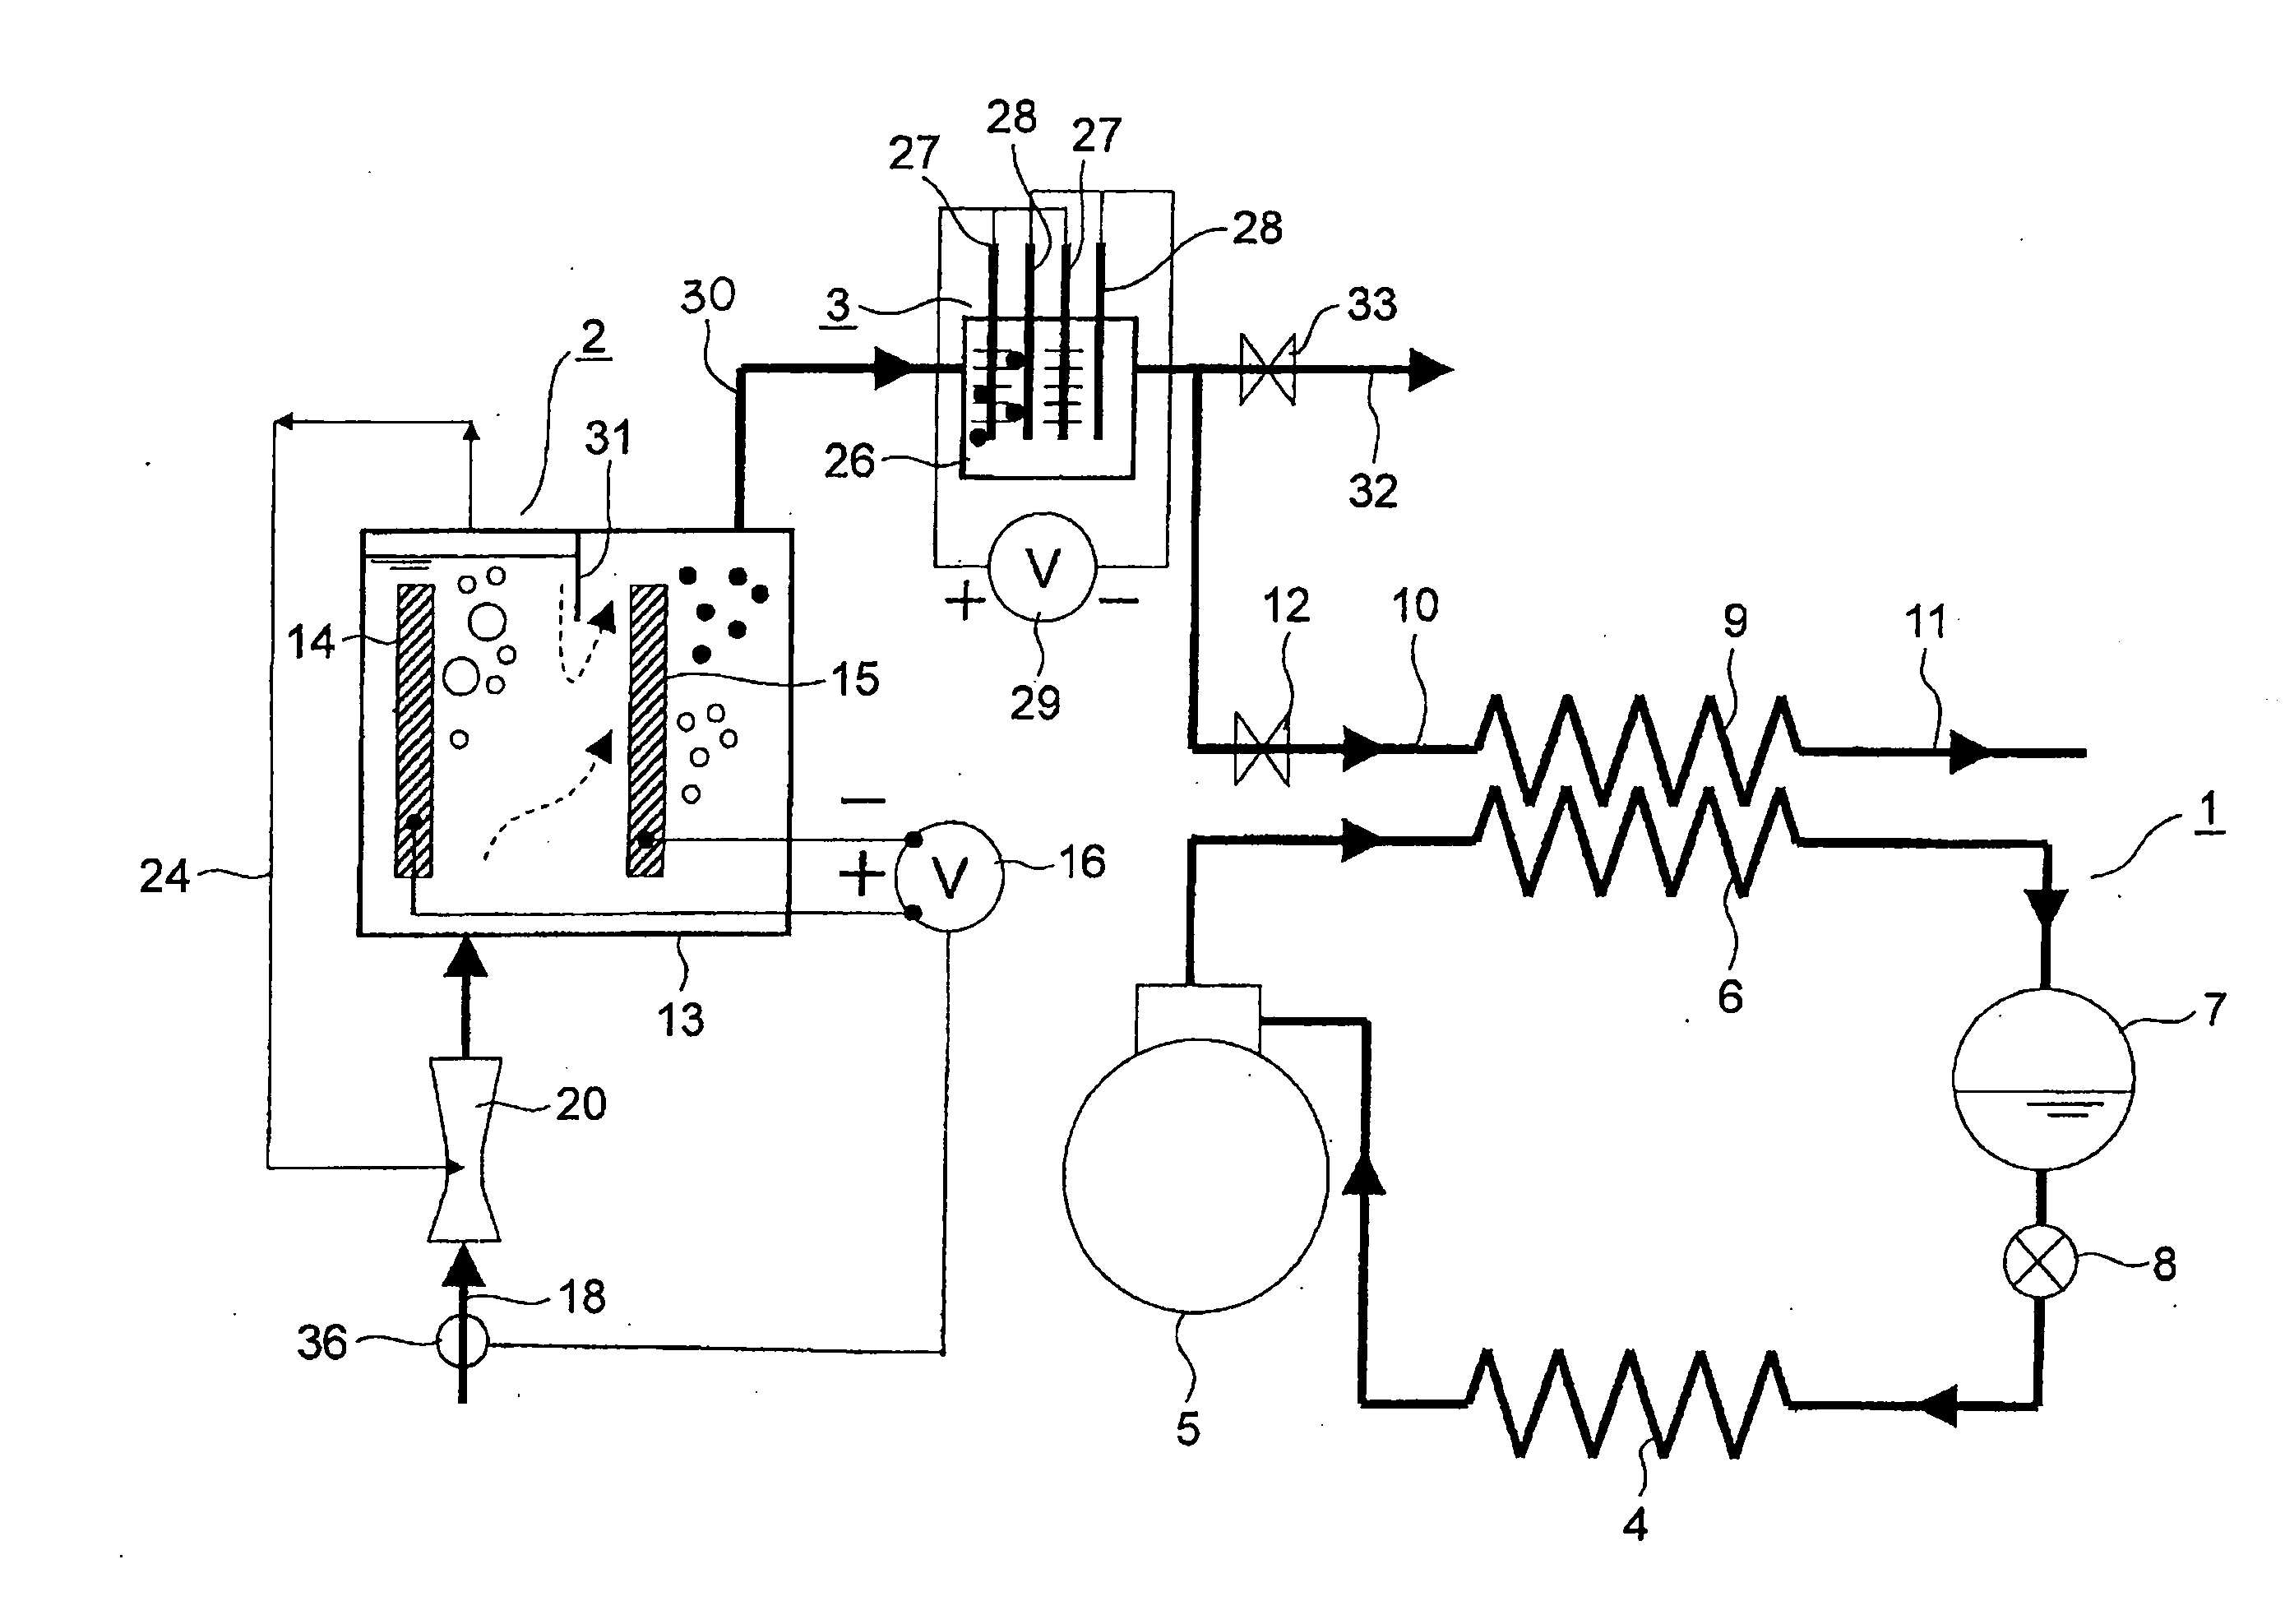 Scale deposition device and water heater